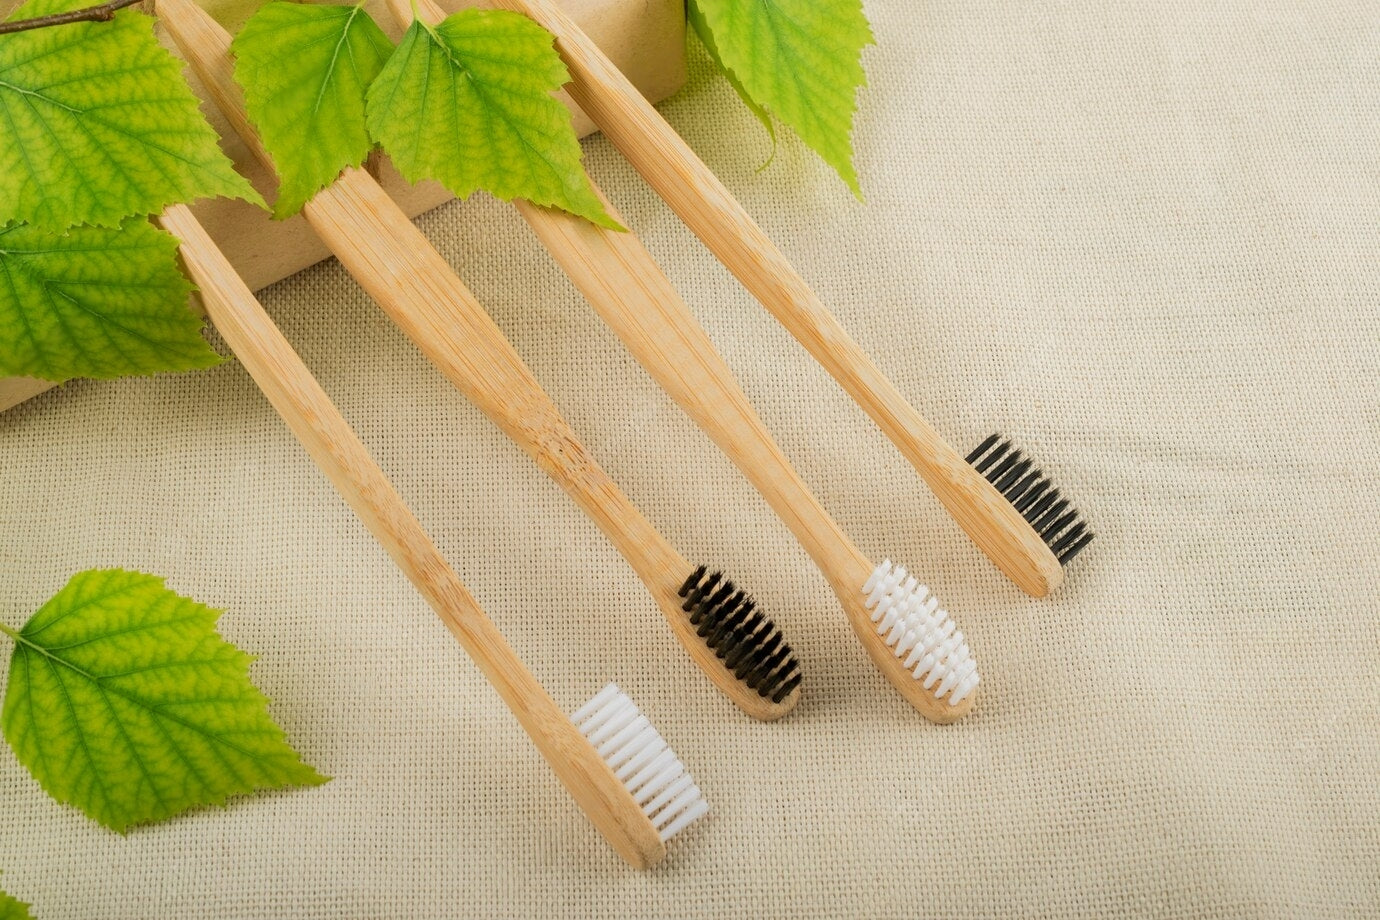 eco-friendly-bamboo-toothbrush-pastel-background-zero-waste-life-without-plastic_223515-196-transformed - Bamboo.